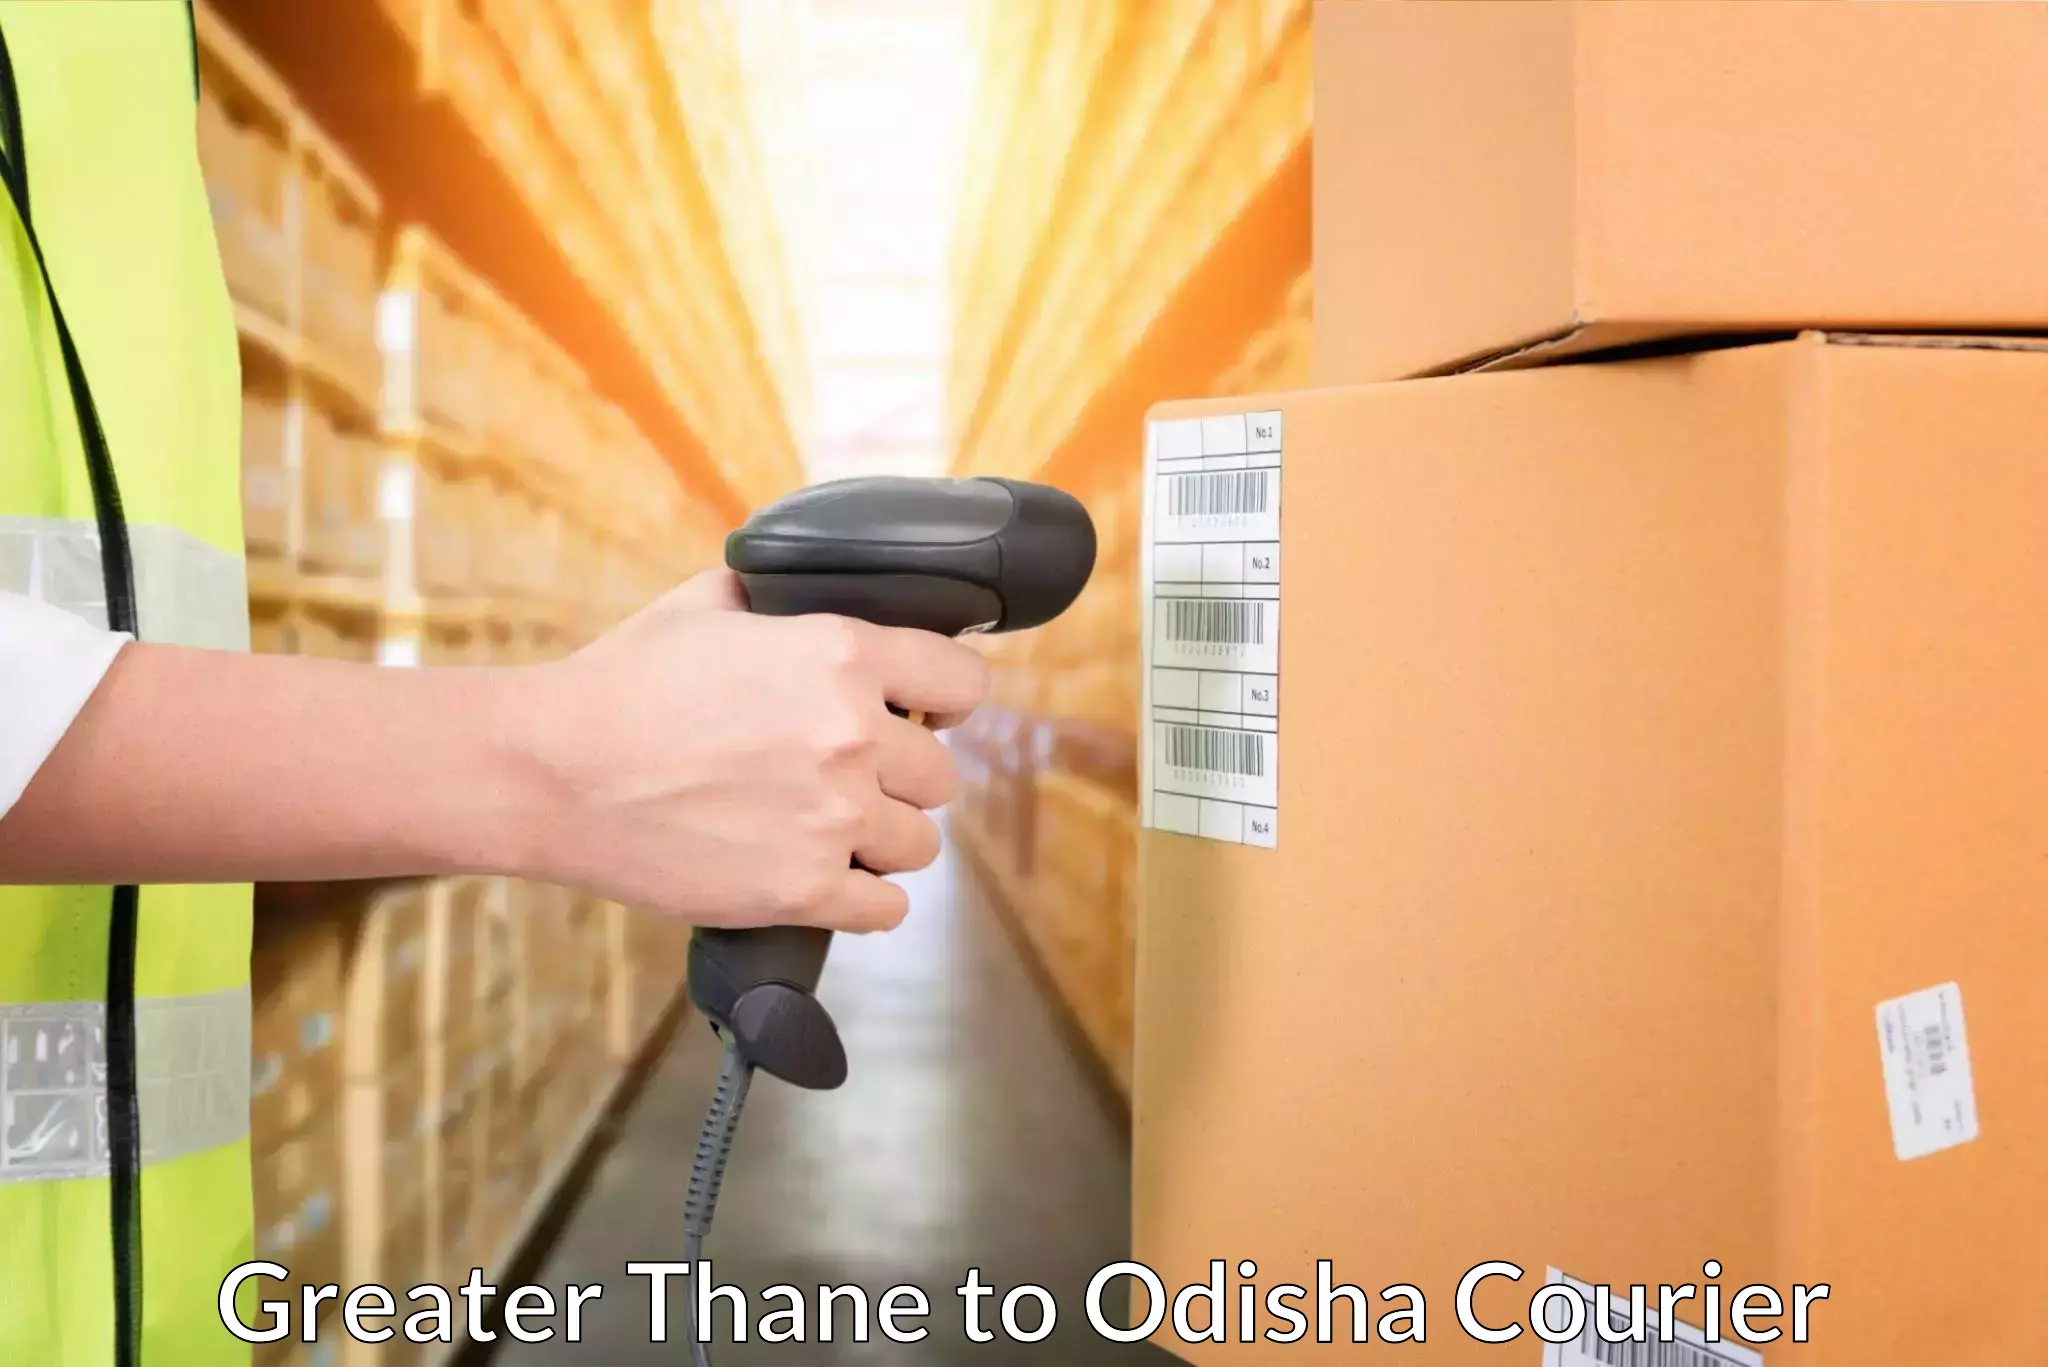 Courier service efficiency Greater Thane to Ghuntagadia